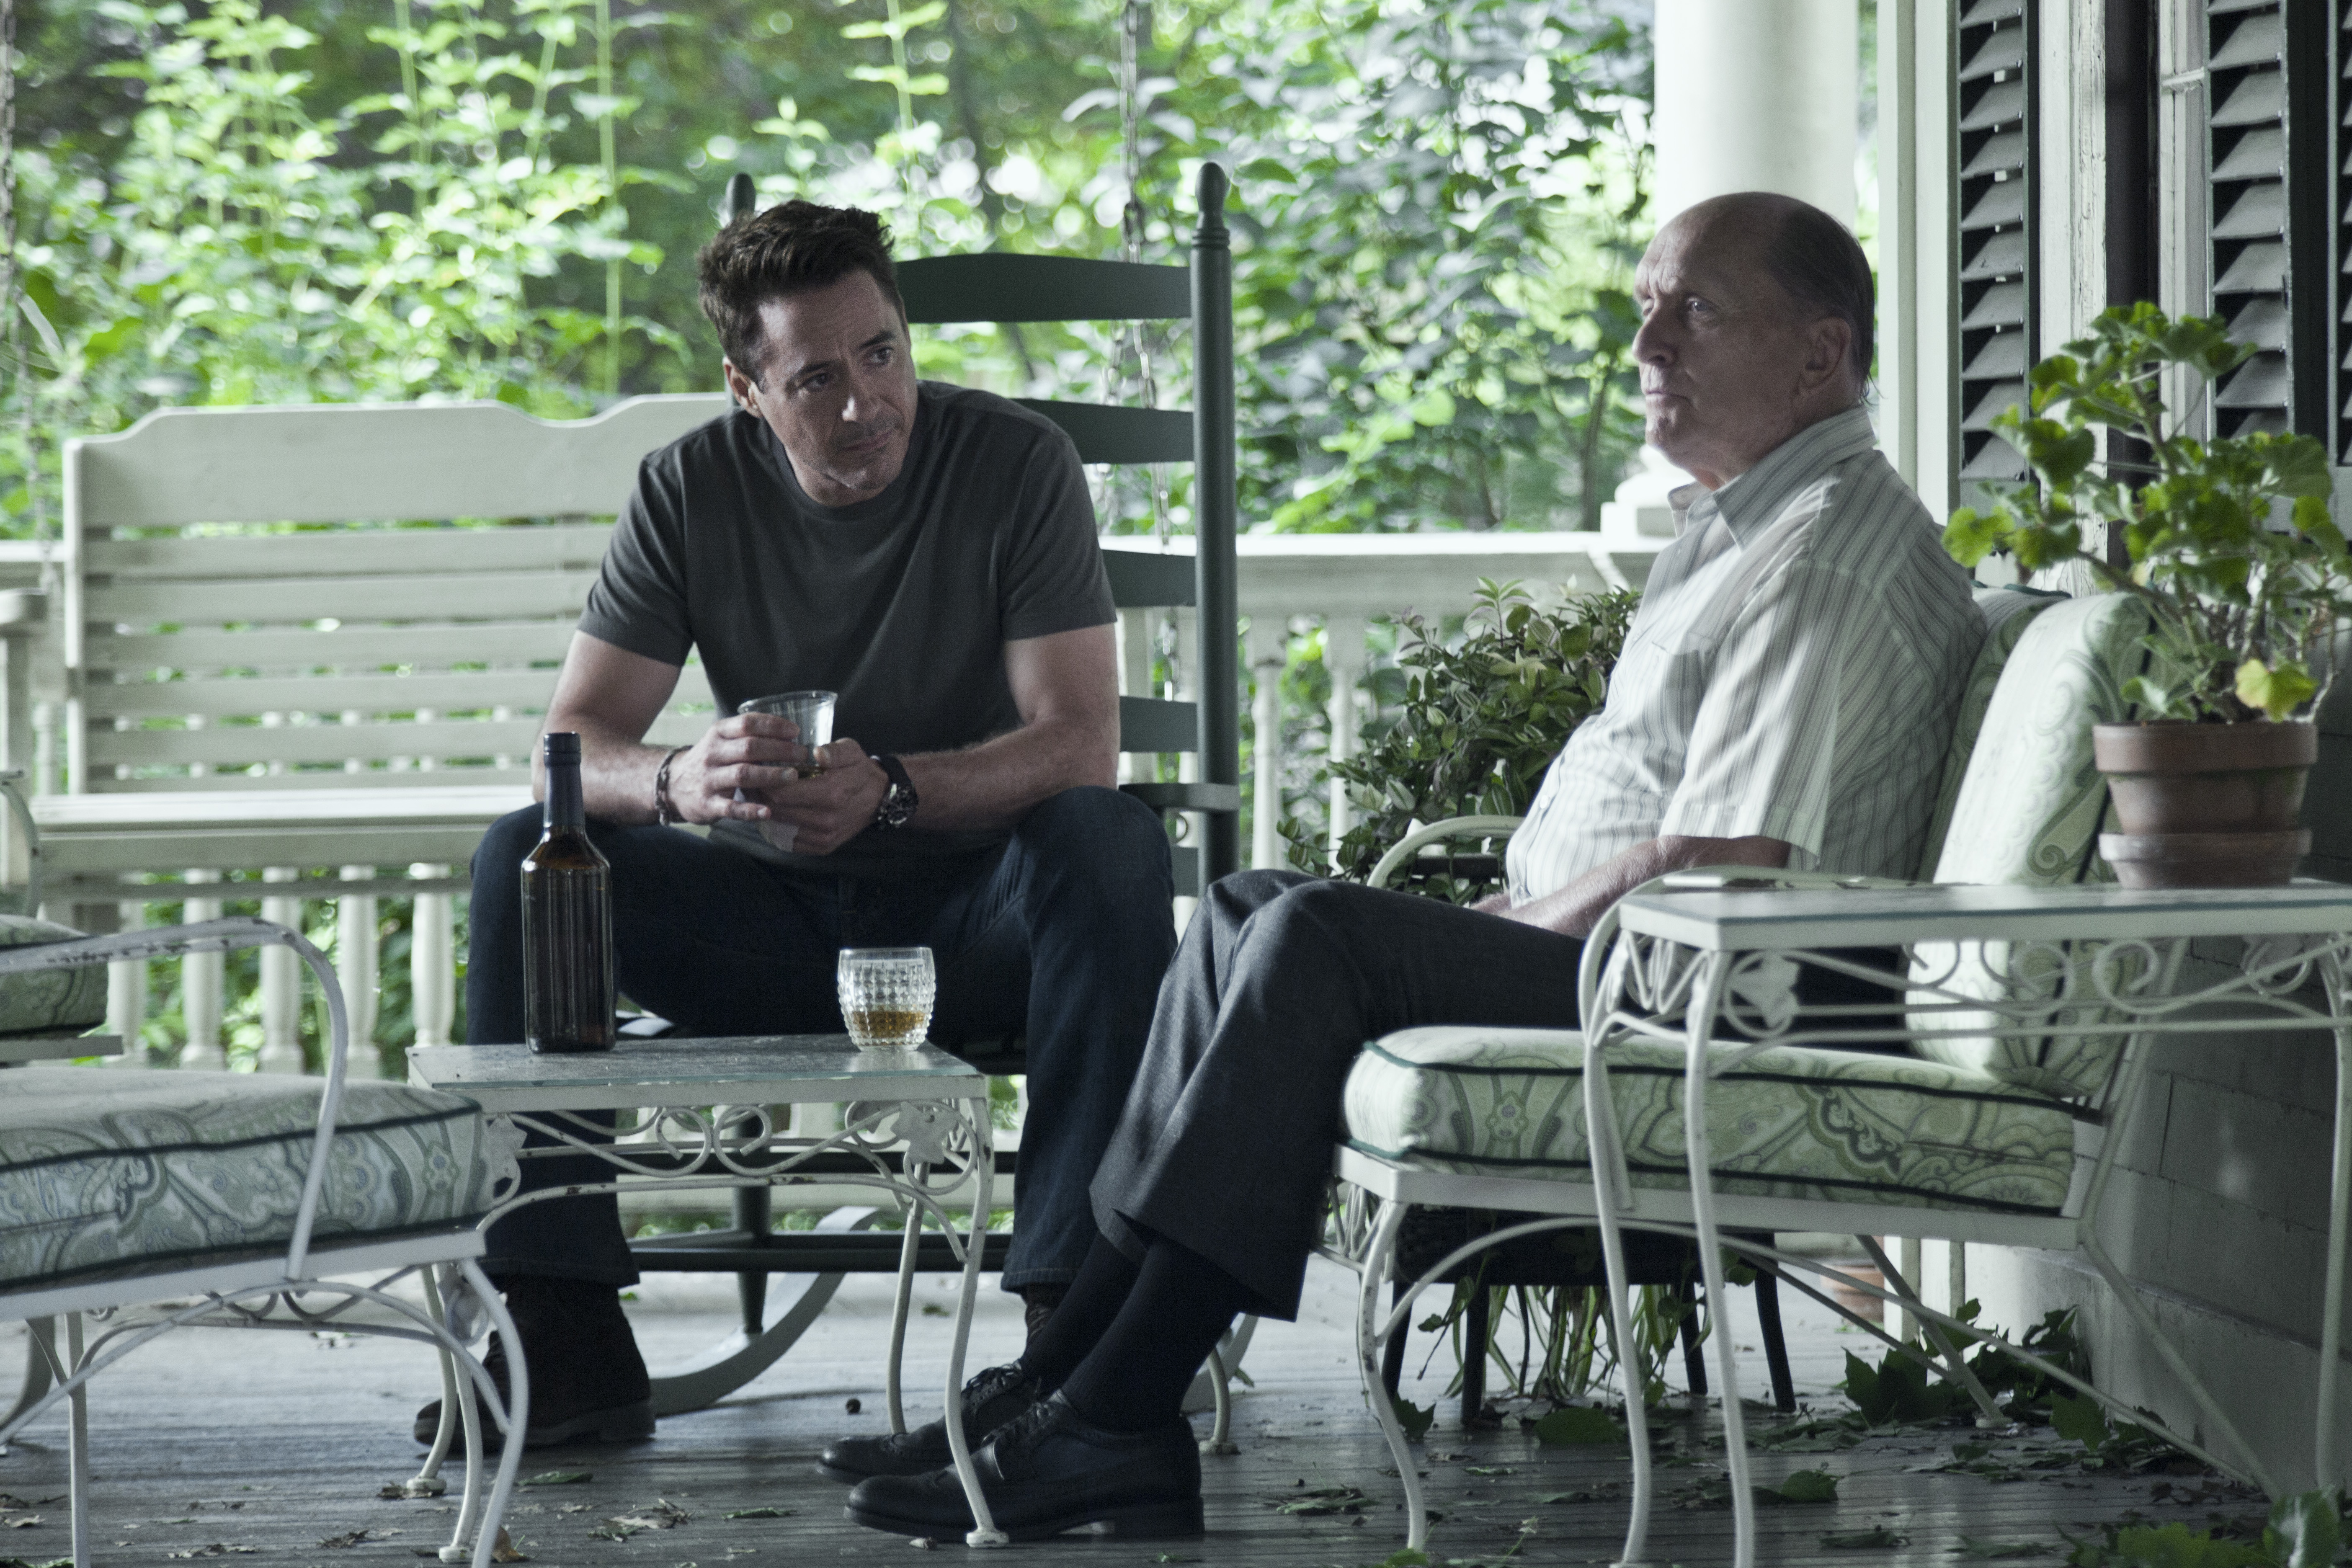 Robert Downey Jr. and Robert Duvall work out legal strategy and family issues in "The Judge."